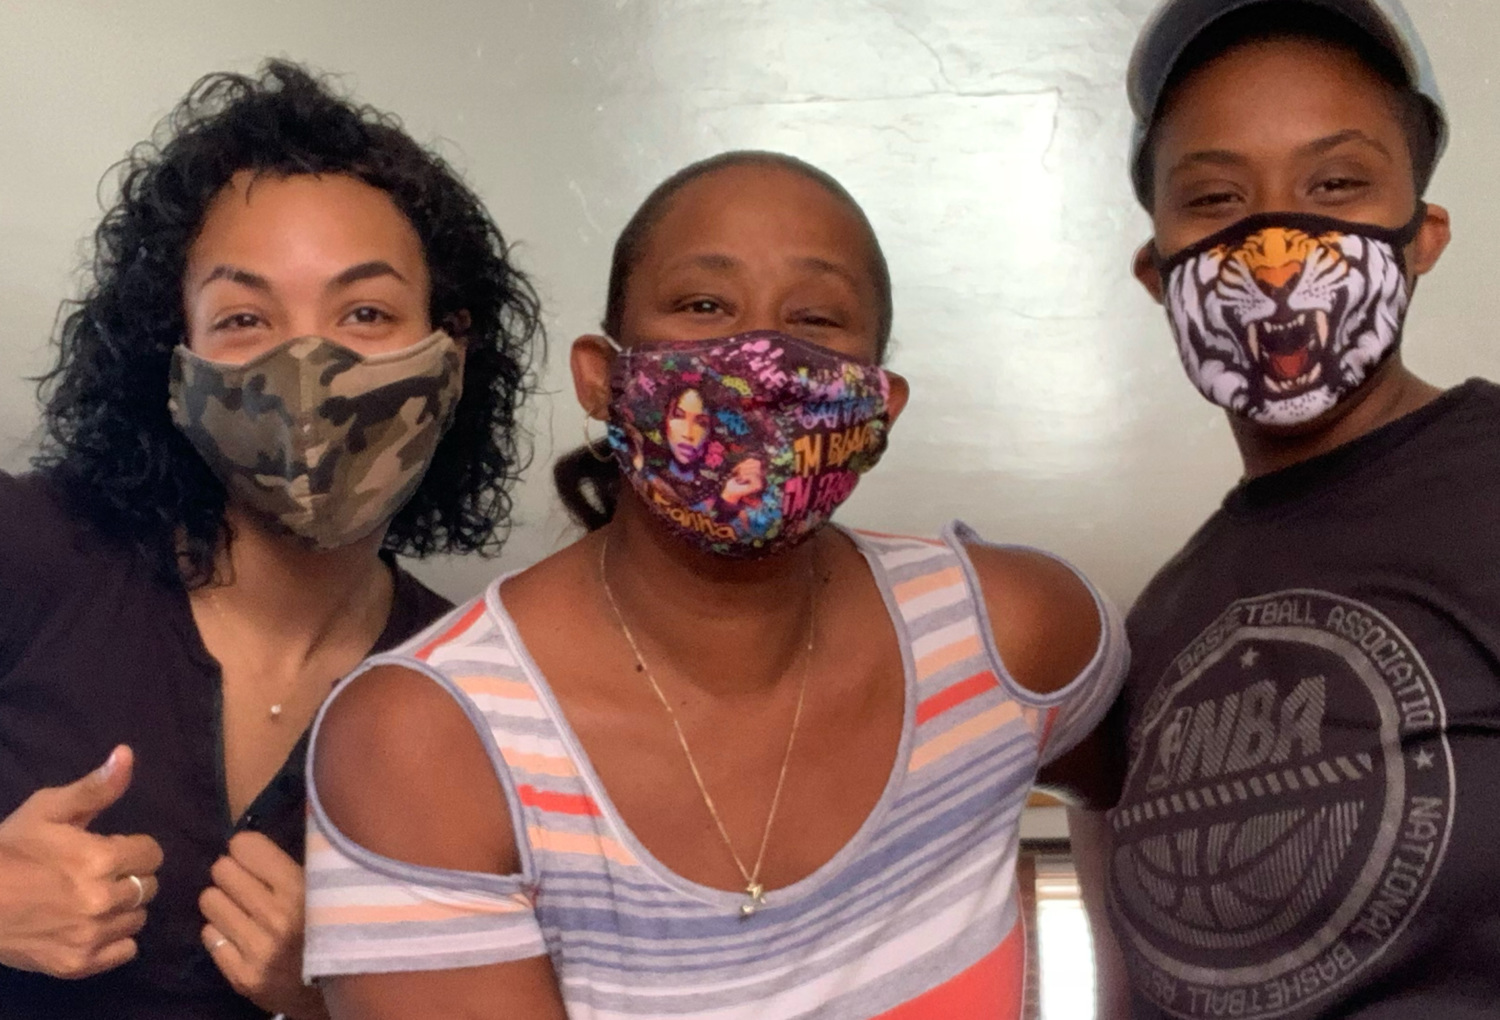 Deana and friends wearing face masks